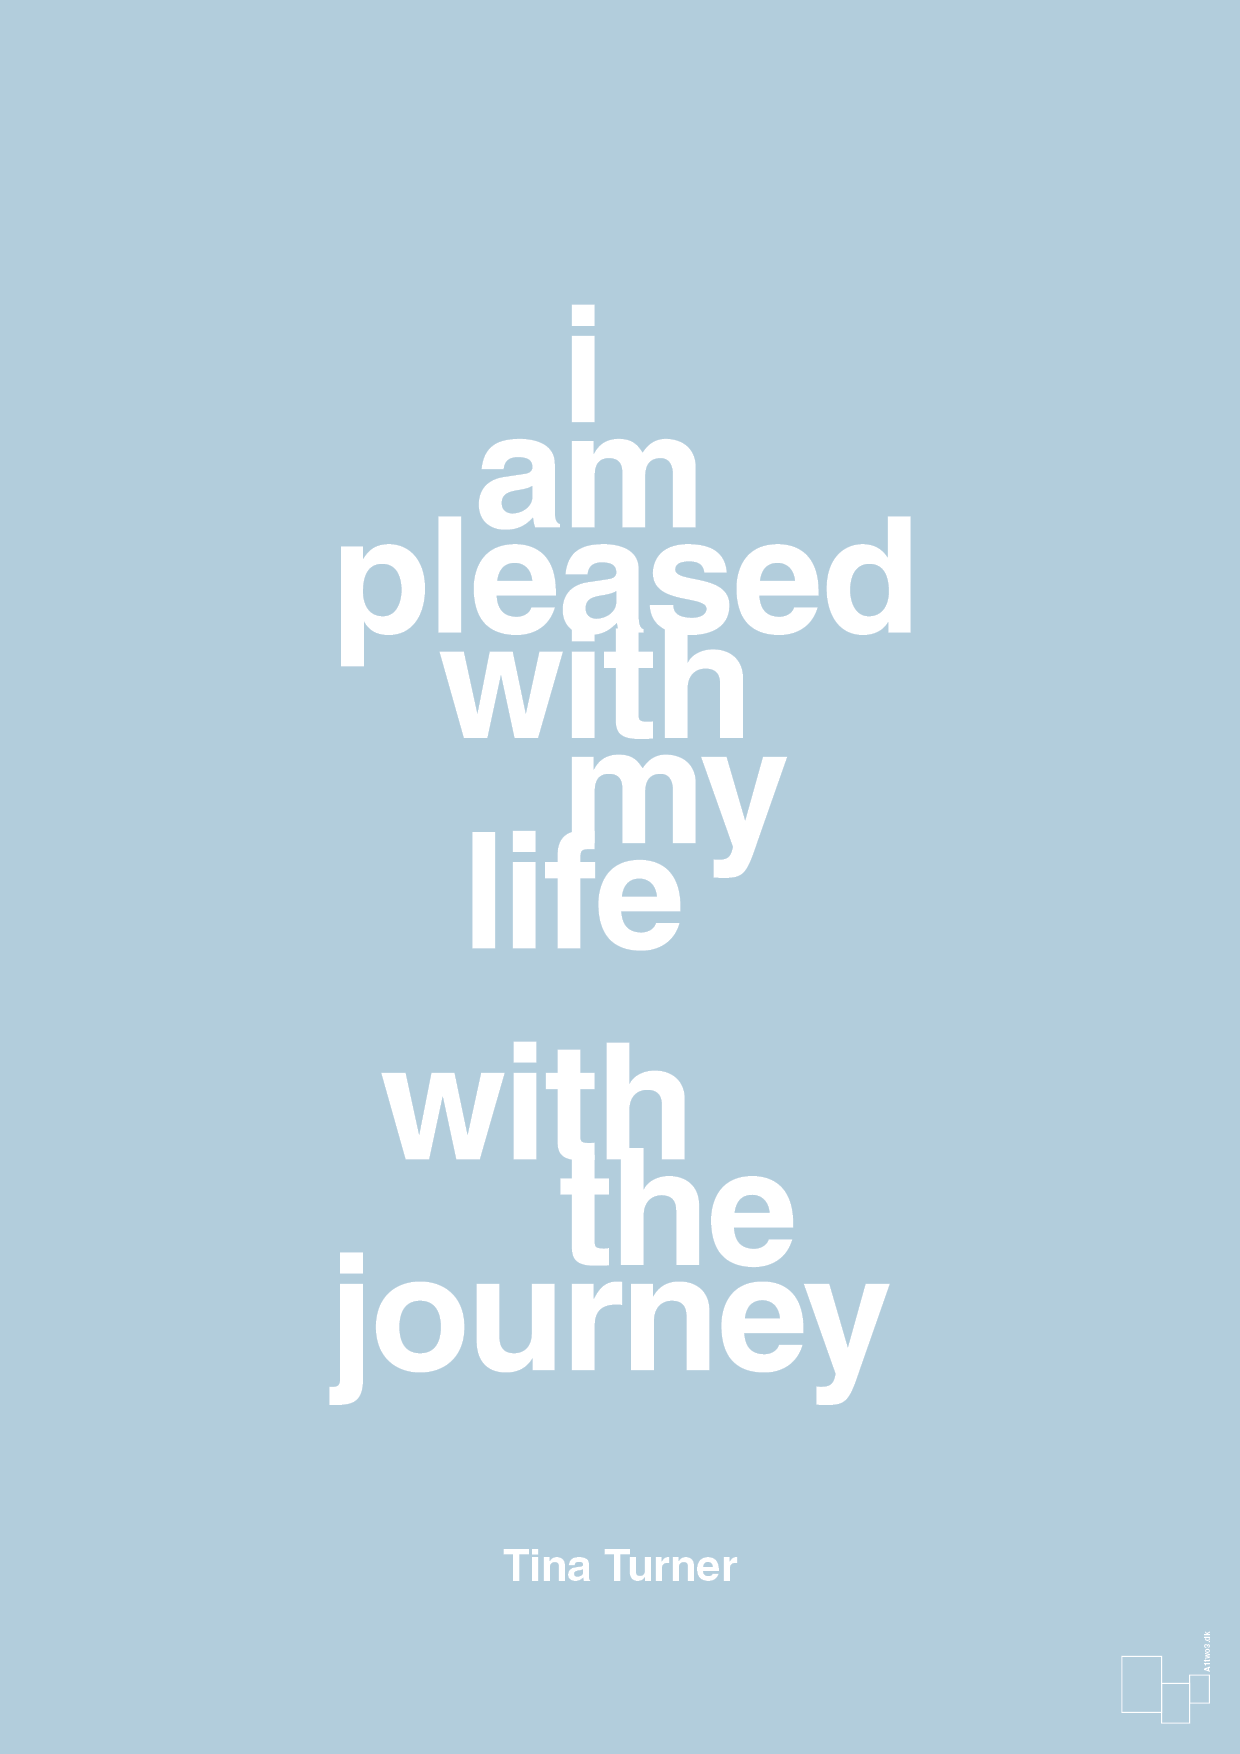 i am pleased with my life with the journey - Plakat med Citater i Heavenly Blue